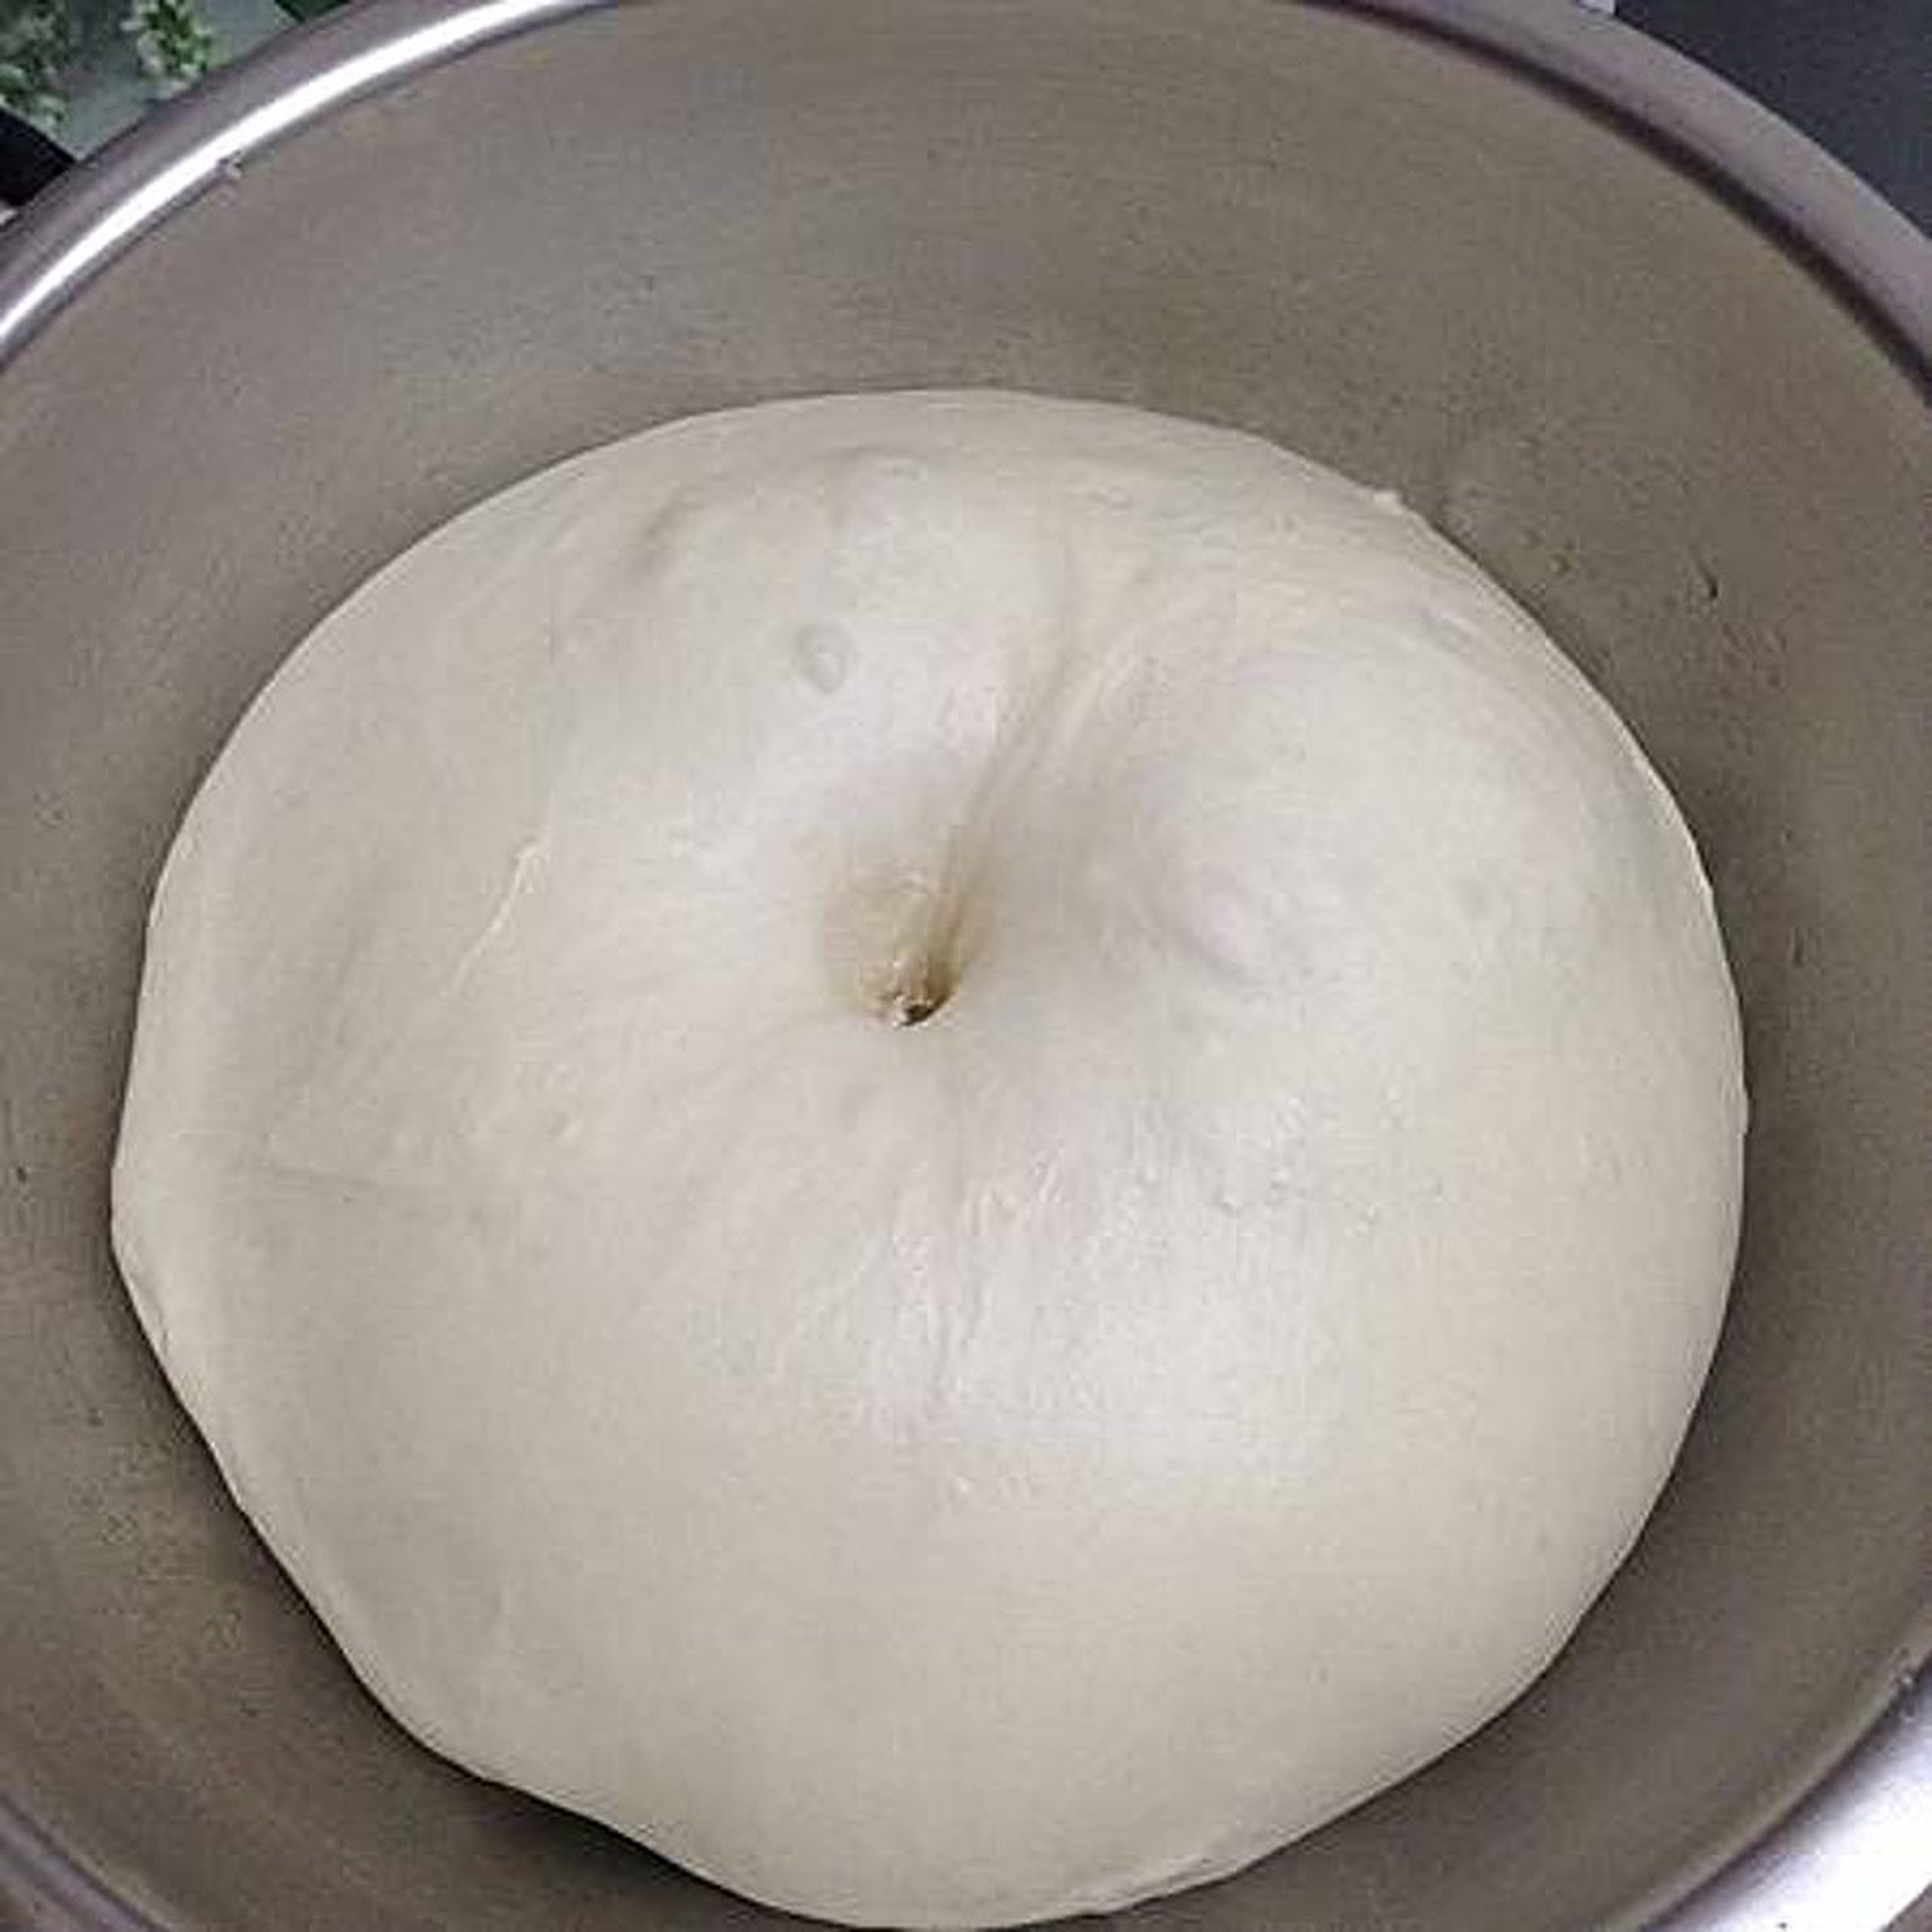 Add the flour, milk powder, sugar, dry yeast, egg and milk in a bowl, mix until the dough is smooth, then add the salt and soft butter, making the dough until soft and smooth. Cover the bowl with towel and place in a warm place until it grow to 2x it’s original size.